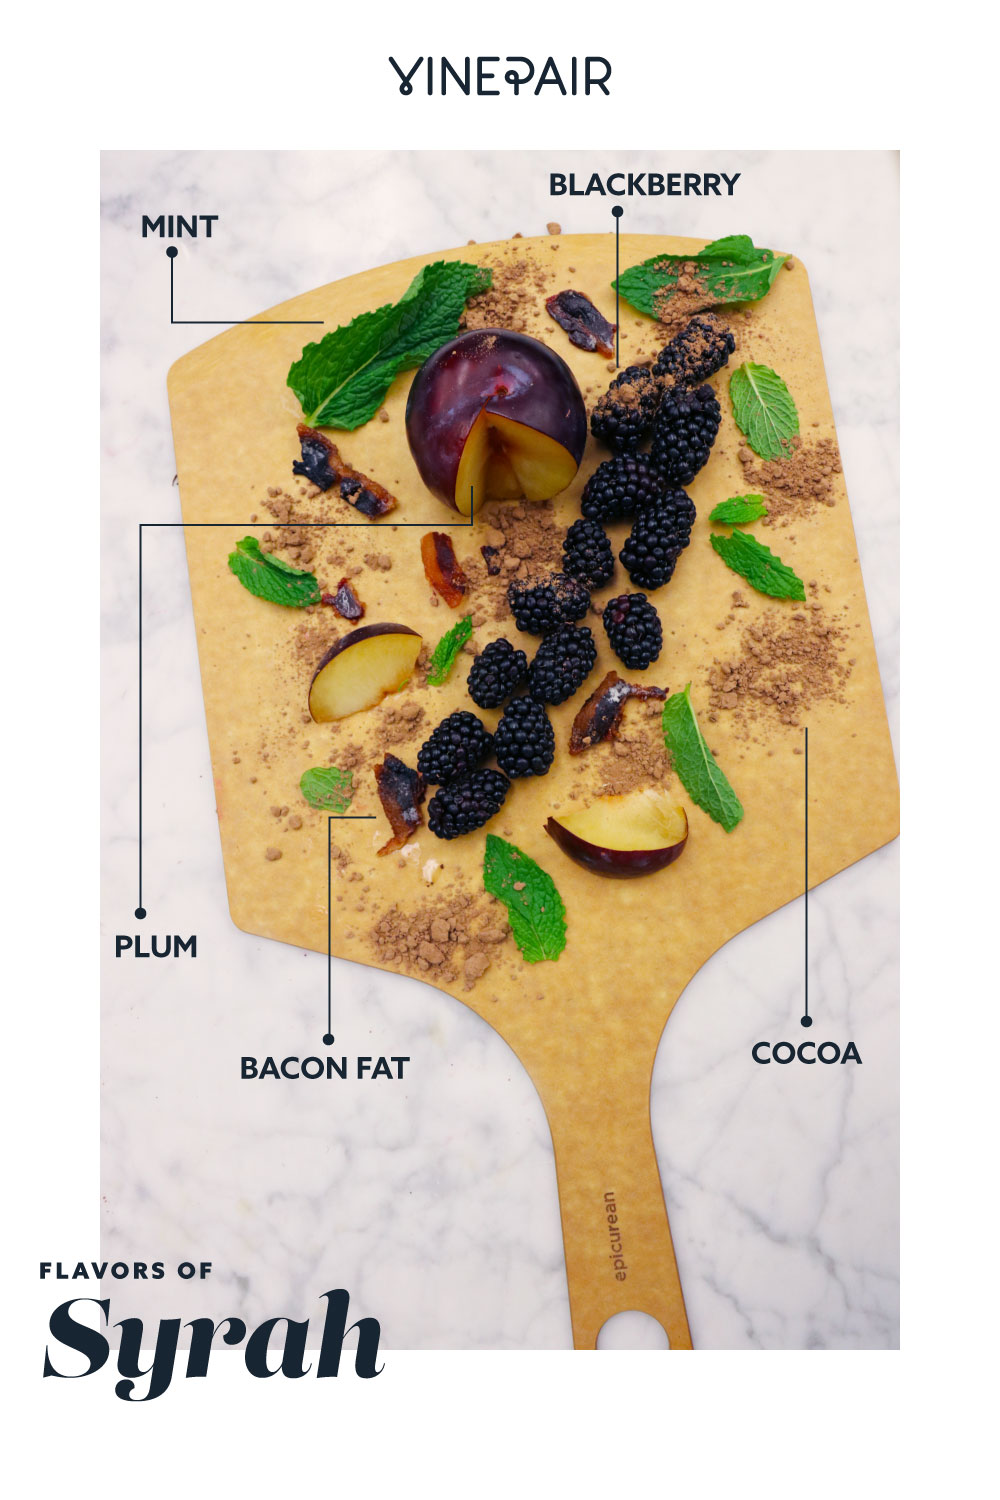 The flavors in Syrah wine